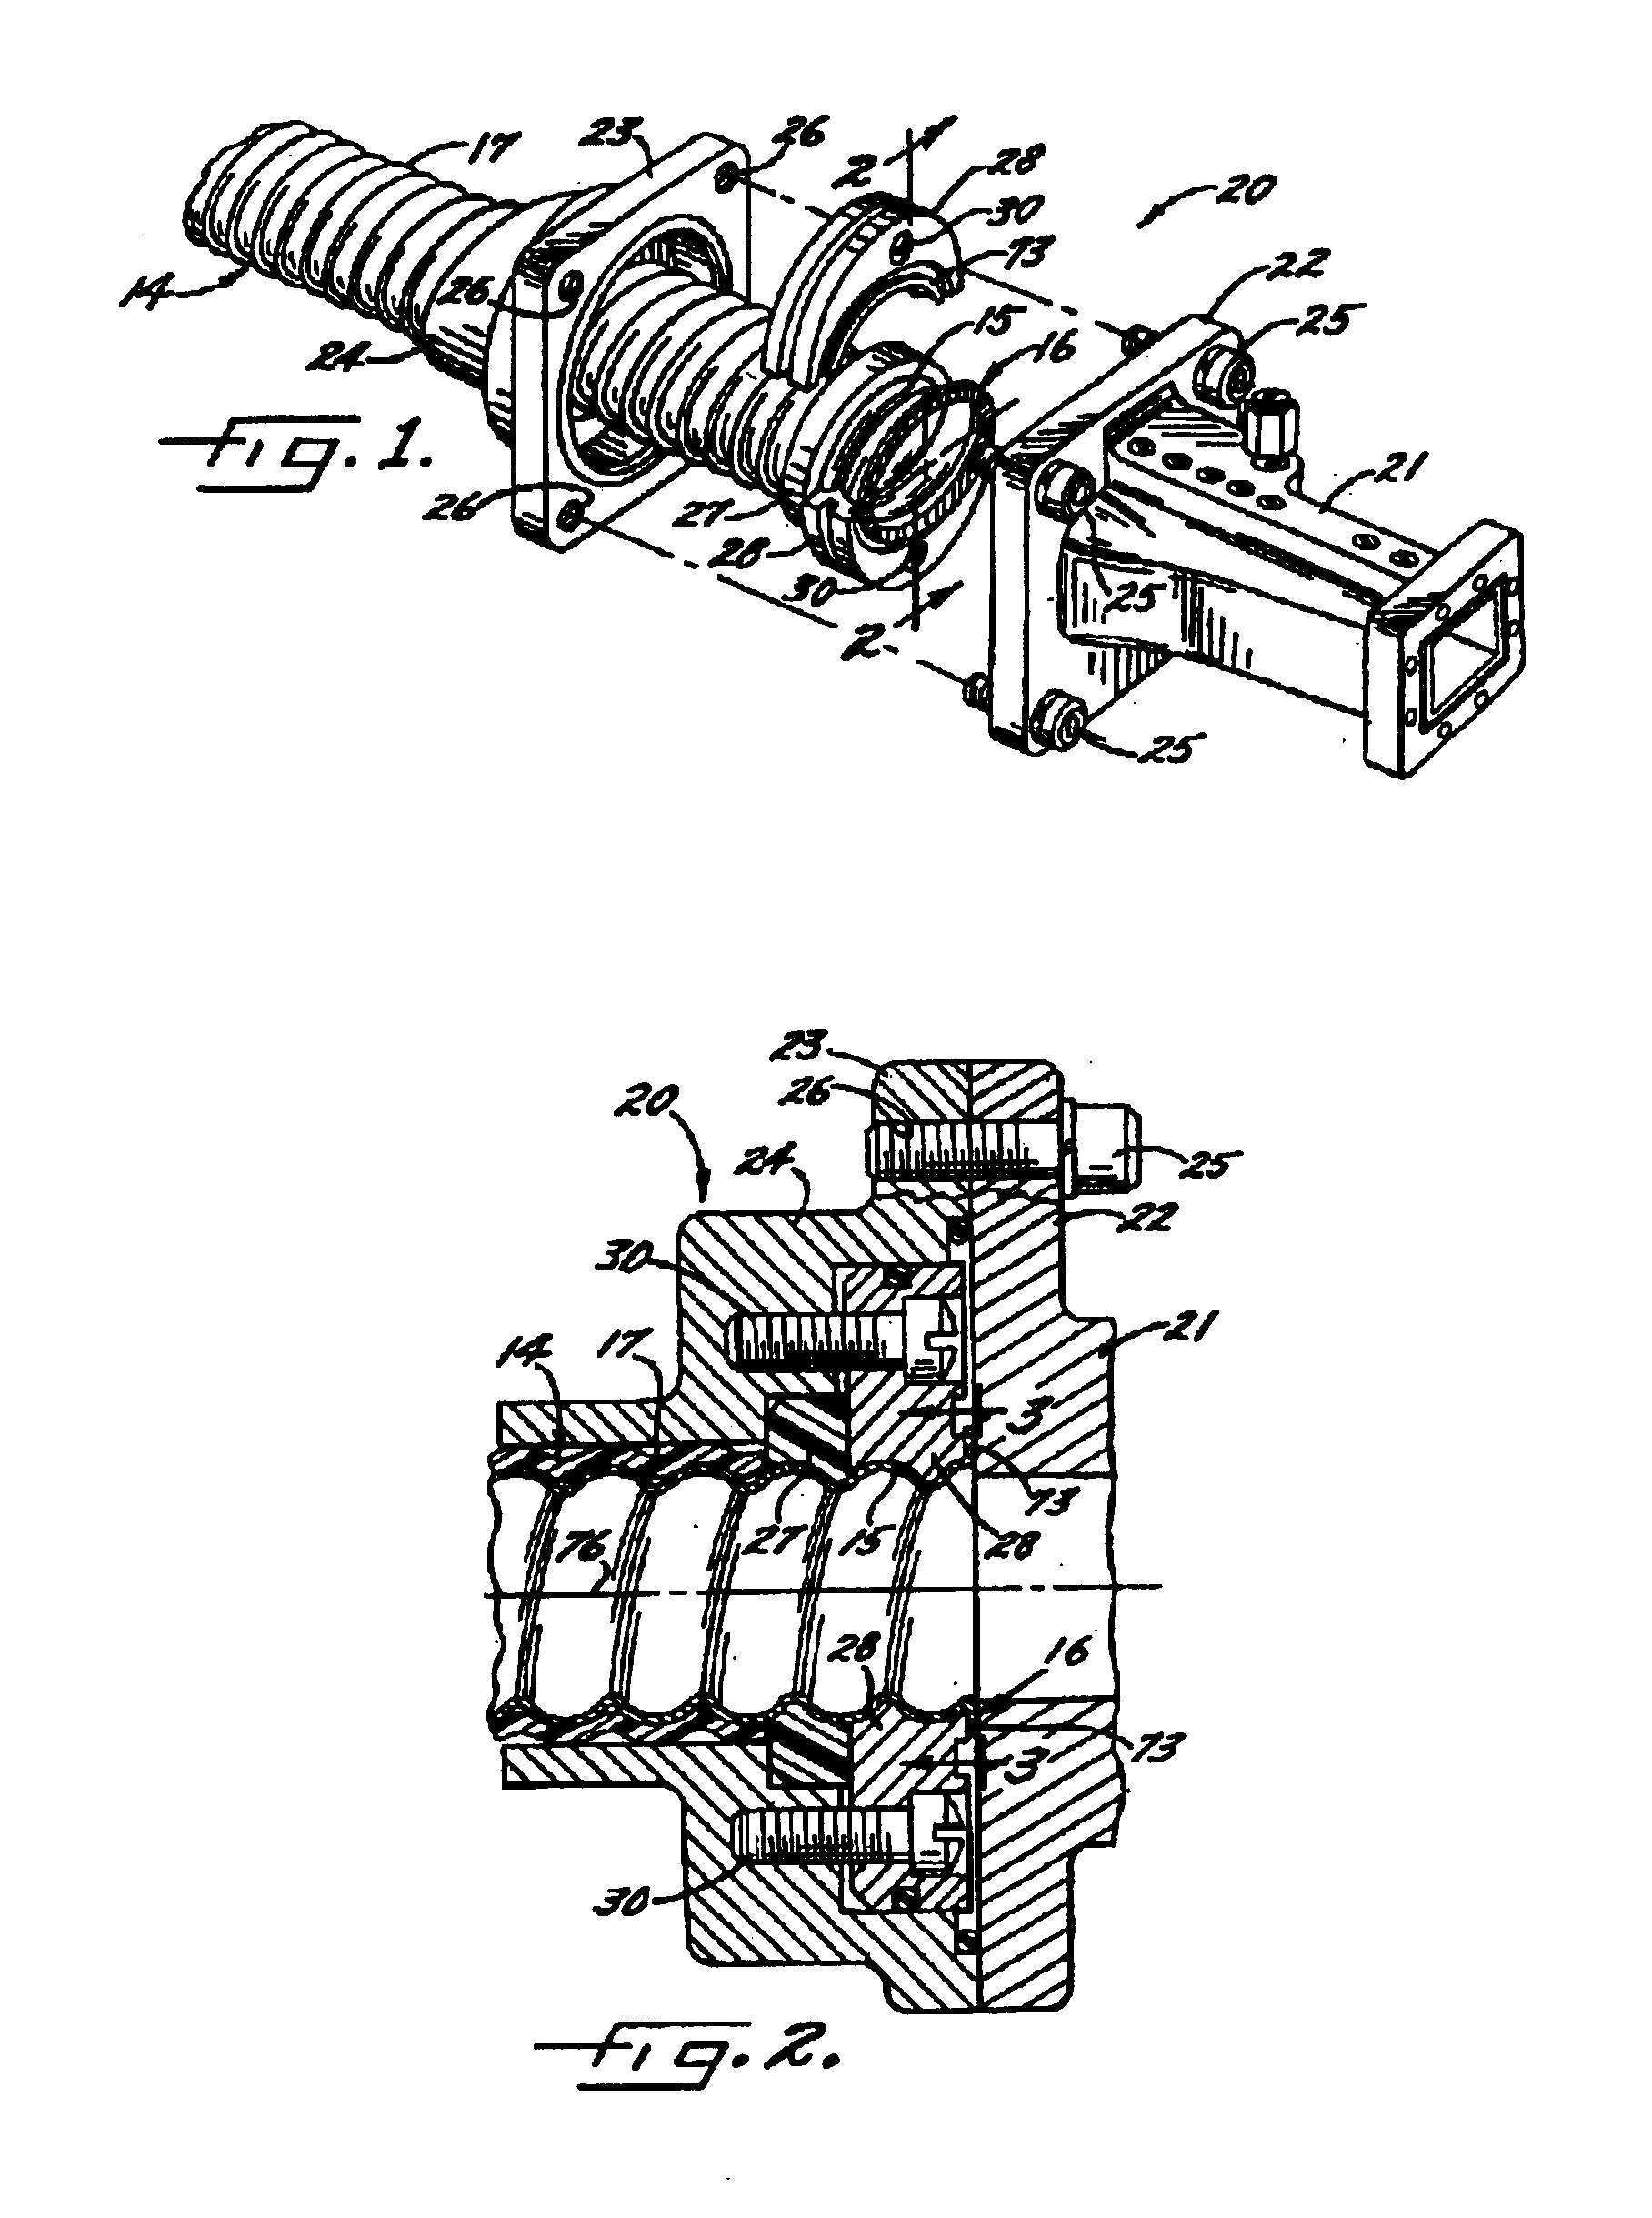 Method and apparatus for flaring a tube